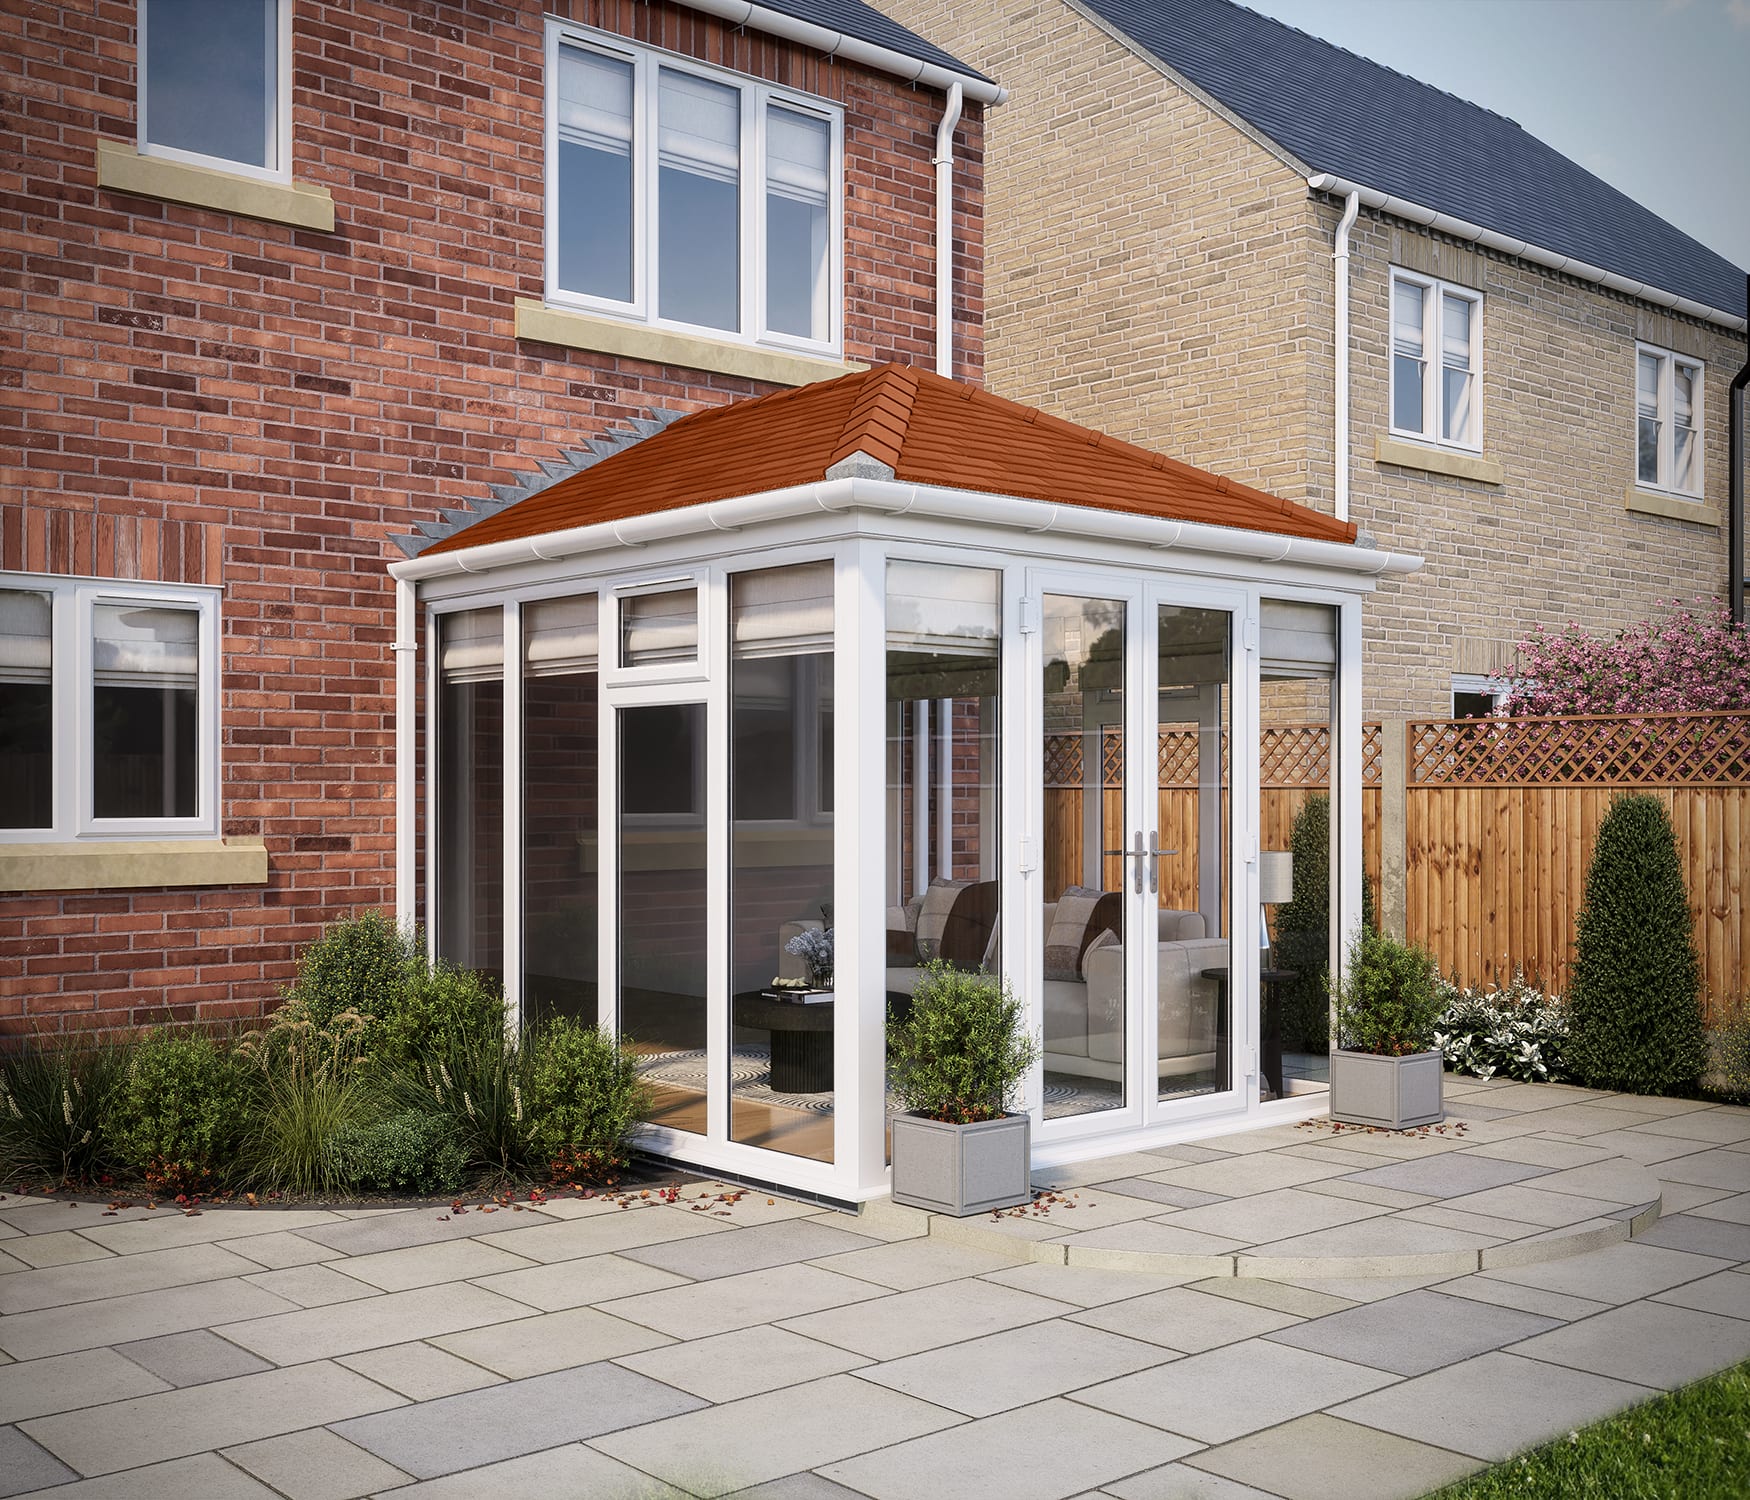 SOLid roof Full Height Edwardian Conservatory White Frames